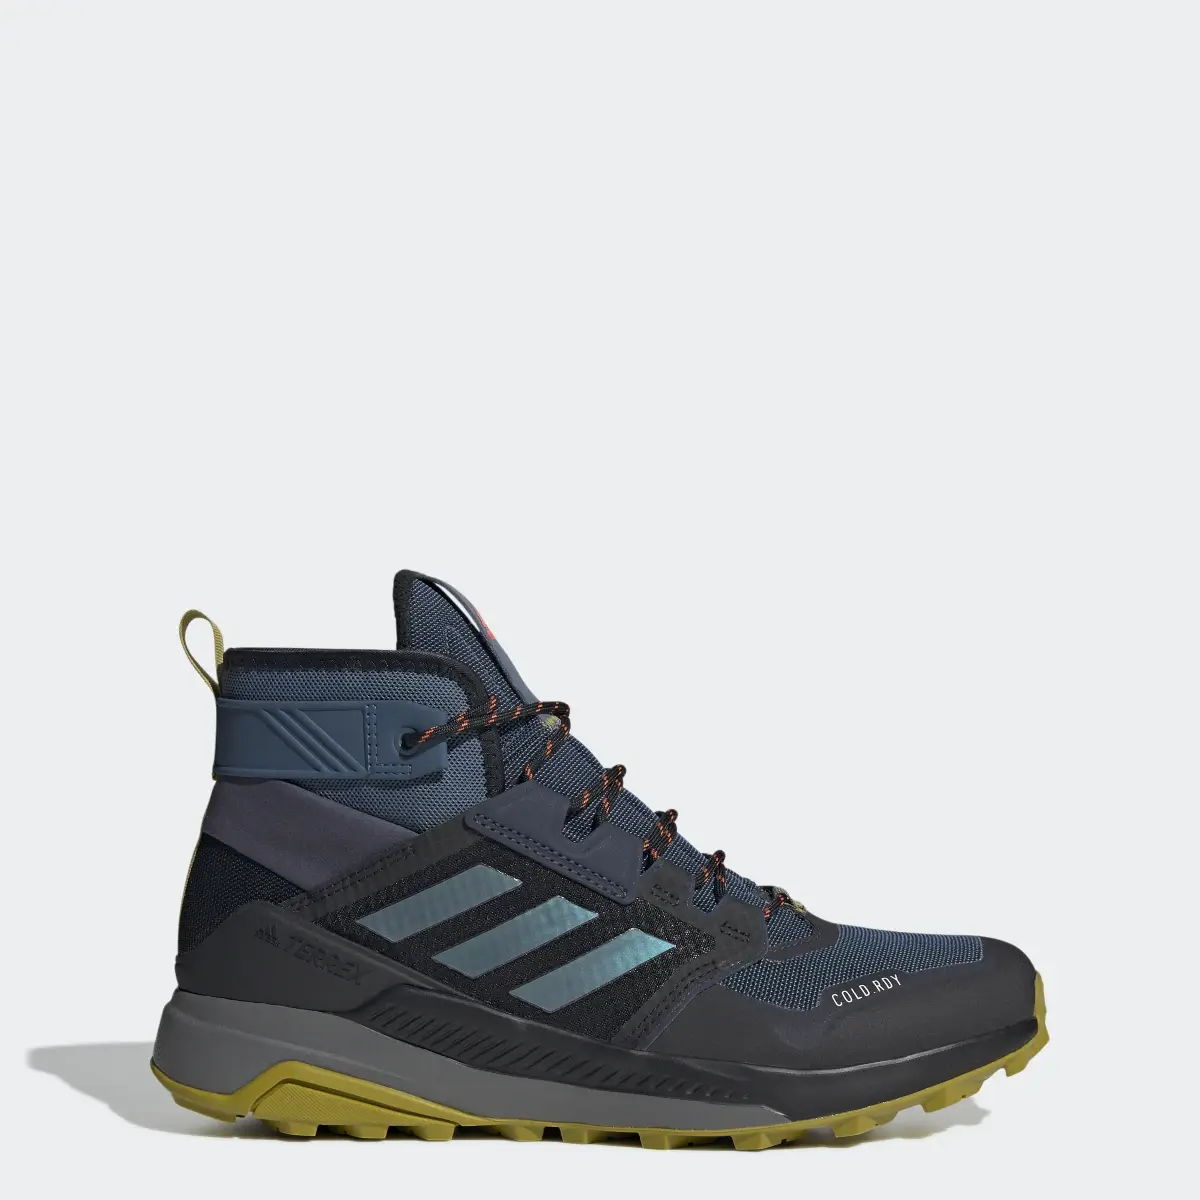 Adidas Terrex Trailmaker Mid COLD.RDY Hiking Boots. 1